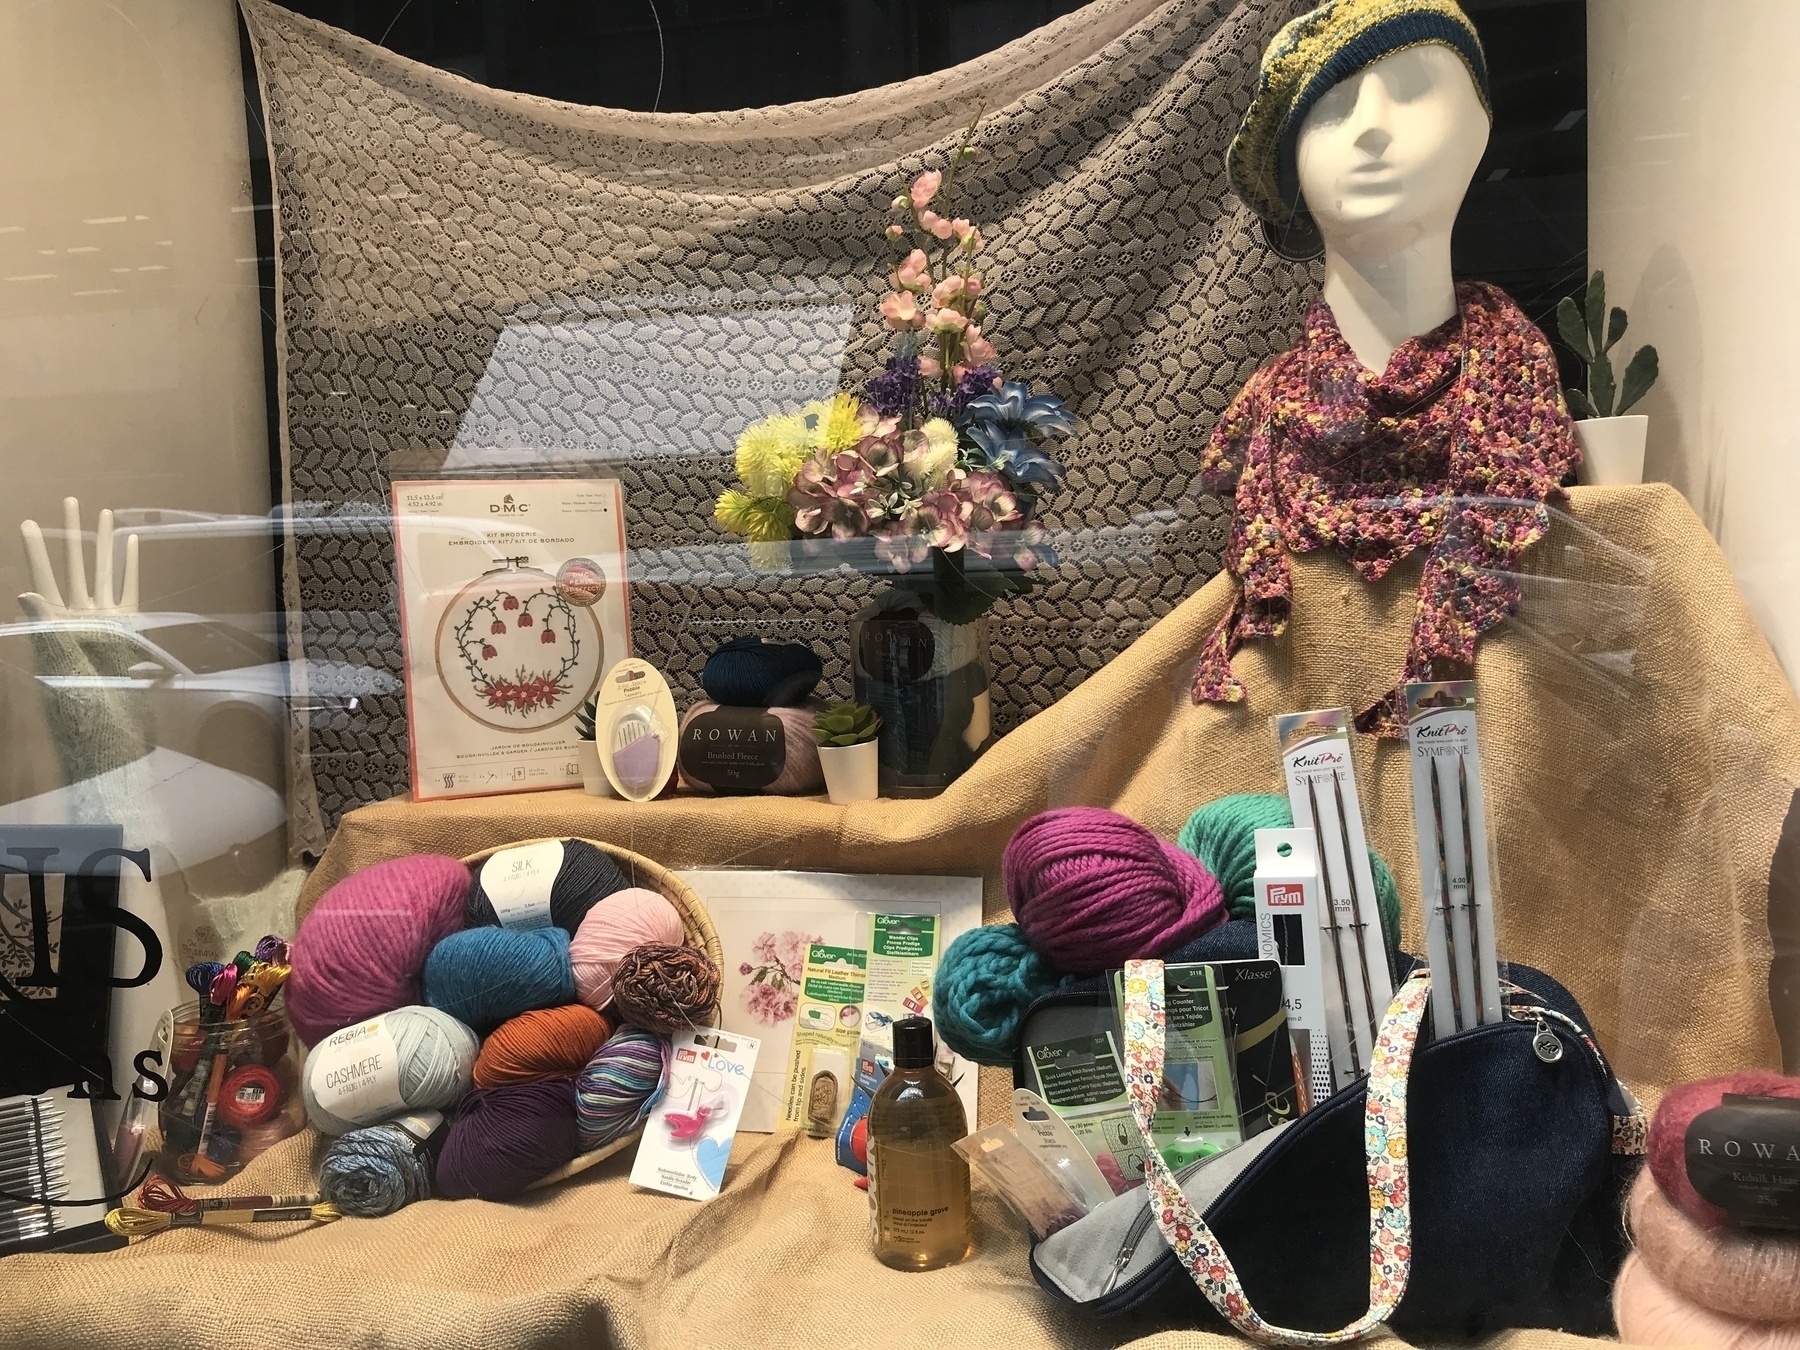 The window display of a needlecraft shop. Against a background of crocheted blanket and plain hessian sacking, colourful balls of wool tumble from basket and bag amid examples of embroidery kits, knitting needles, bags, embroidered straps and labels, and bundles loops of thread. A tall arrangement of flowers fills the middle, with a tiny small potted succulent at its base, and on the right is a mannequin’s head and shoulders wearing loops of thick, knitted scarf in autumn colours, and a floppy knitted beret in black and yellow. At the back, on the left, an upstretched mannequin’s hand emerges from a green knitted wrist-warmer.